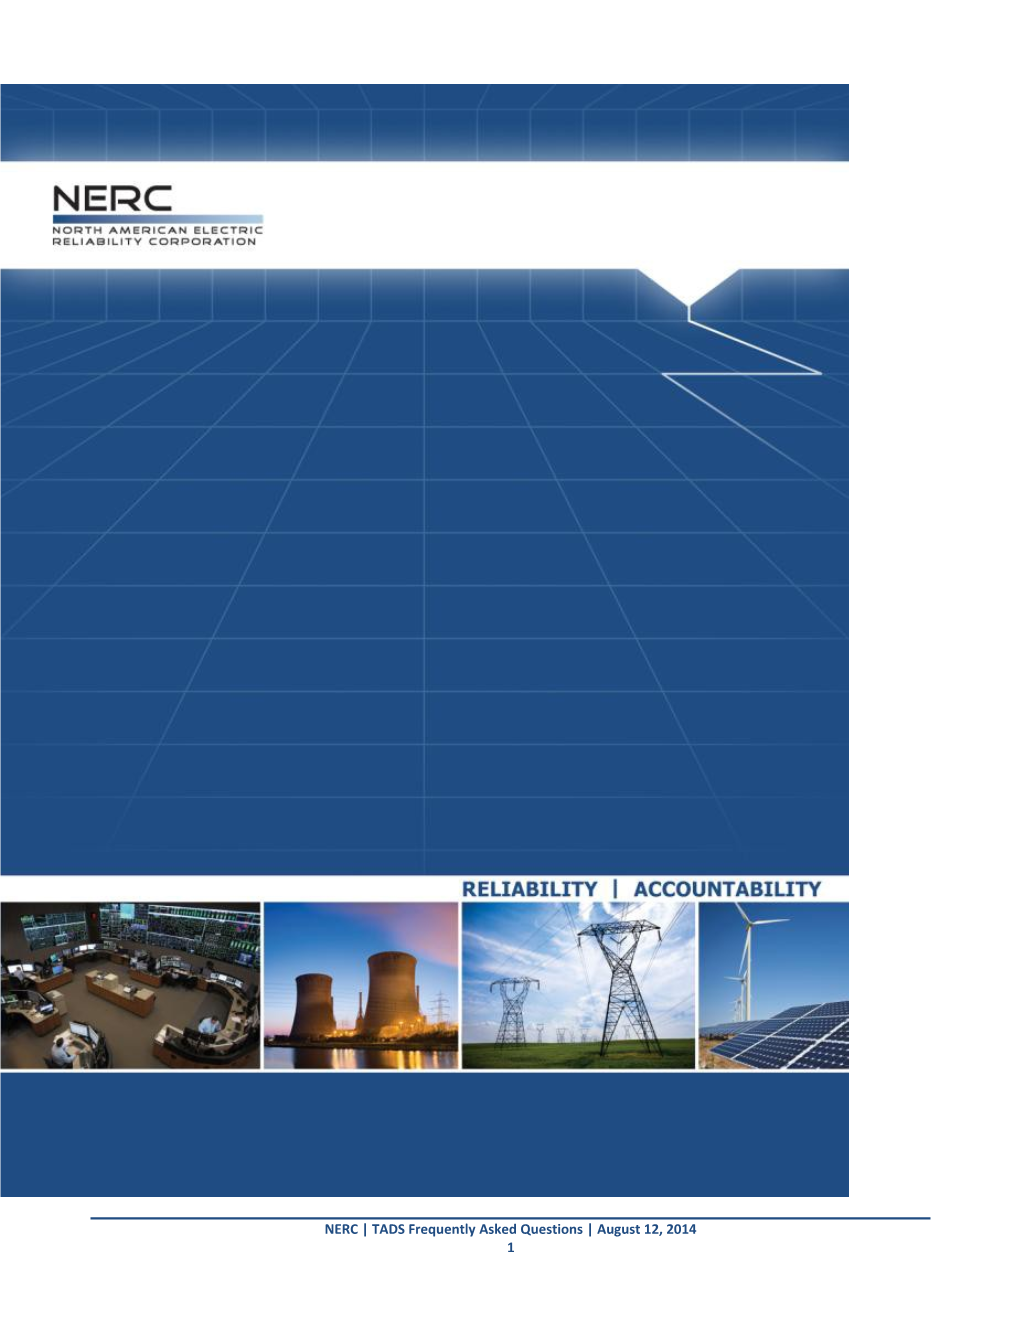 NERC TADS: Frequently Asked Questions